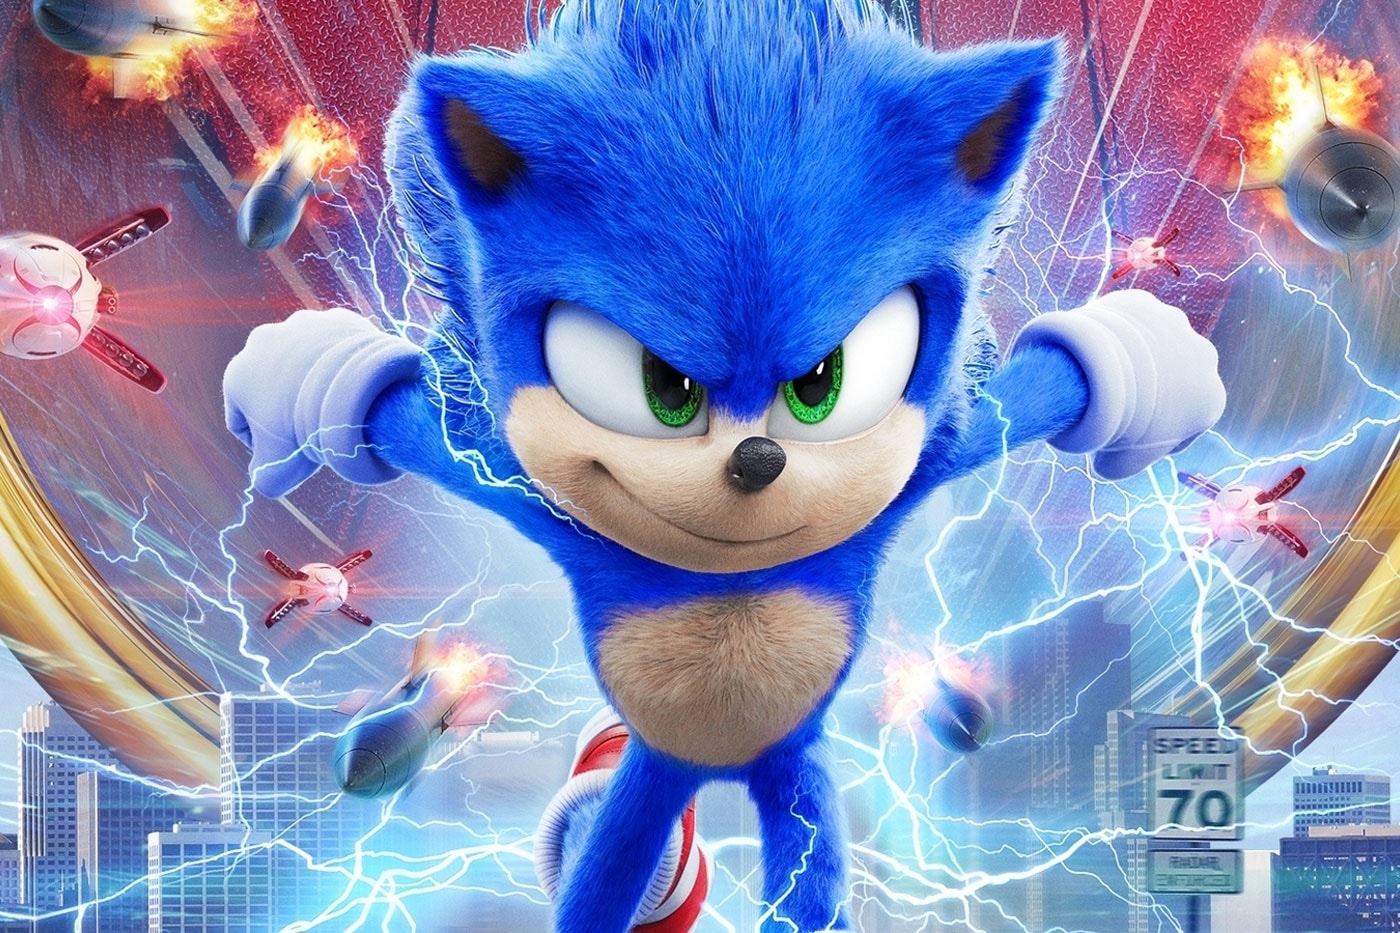 Sonic the Hedgehog 3 gets a release date- Cinema express